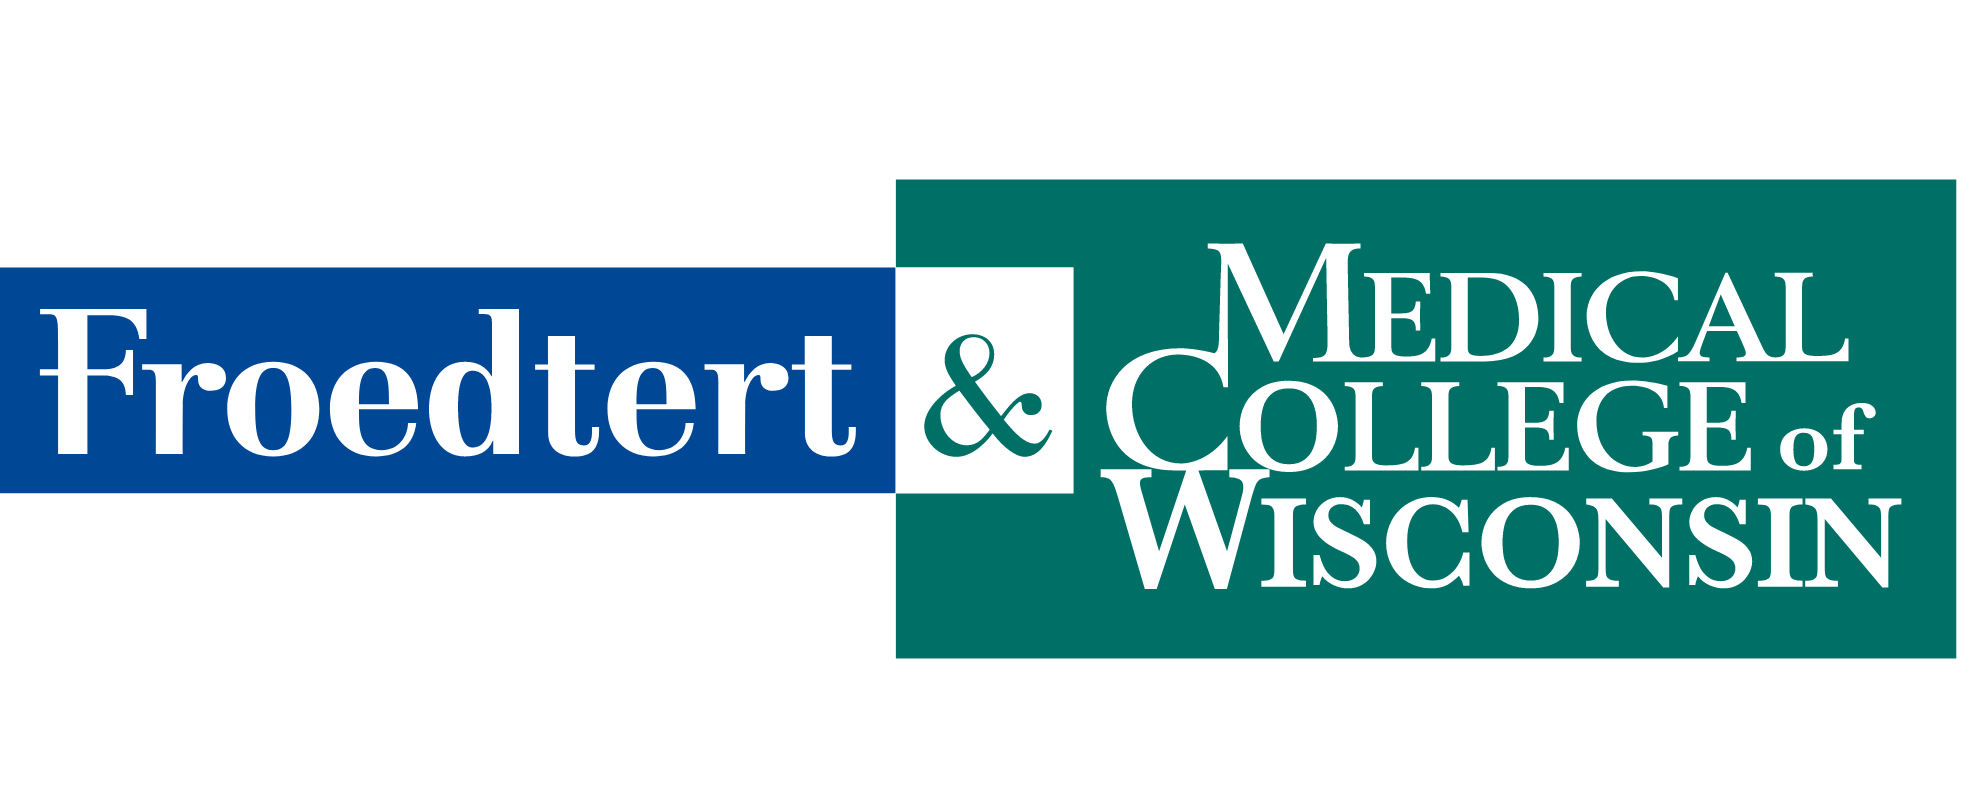 Froedtert & Medical College of Wisconsin (F&MCW)